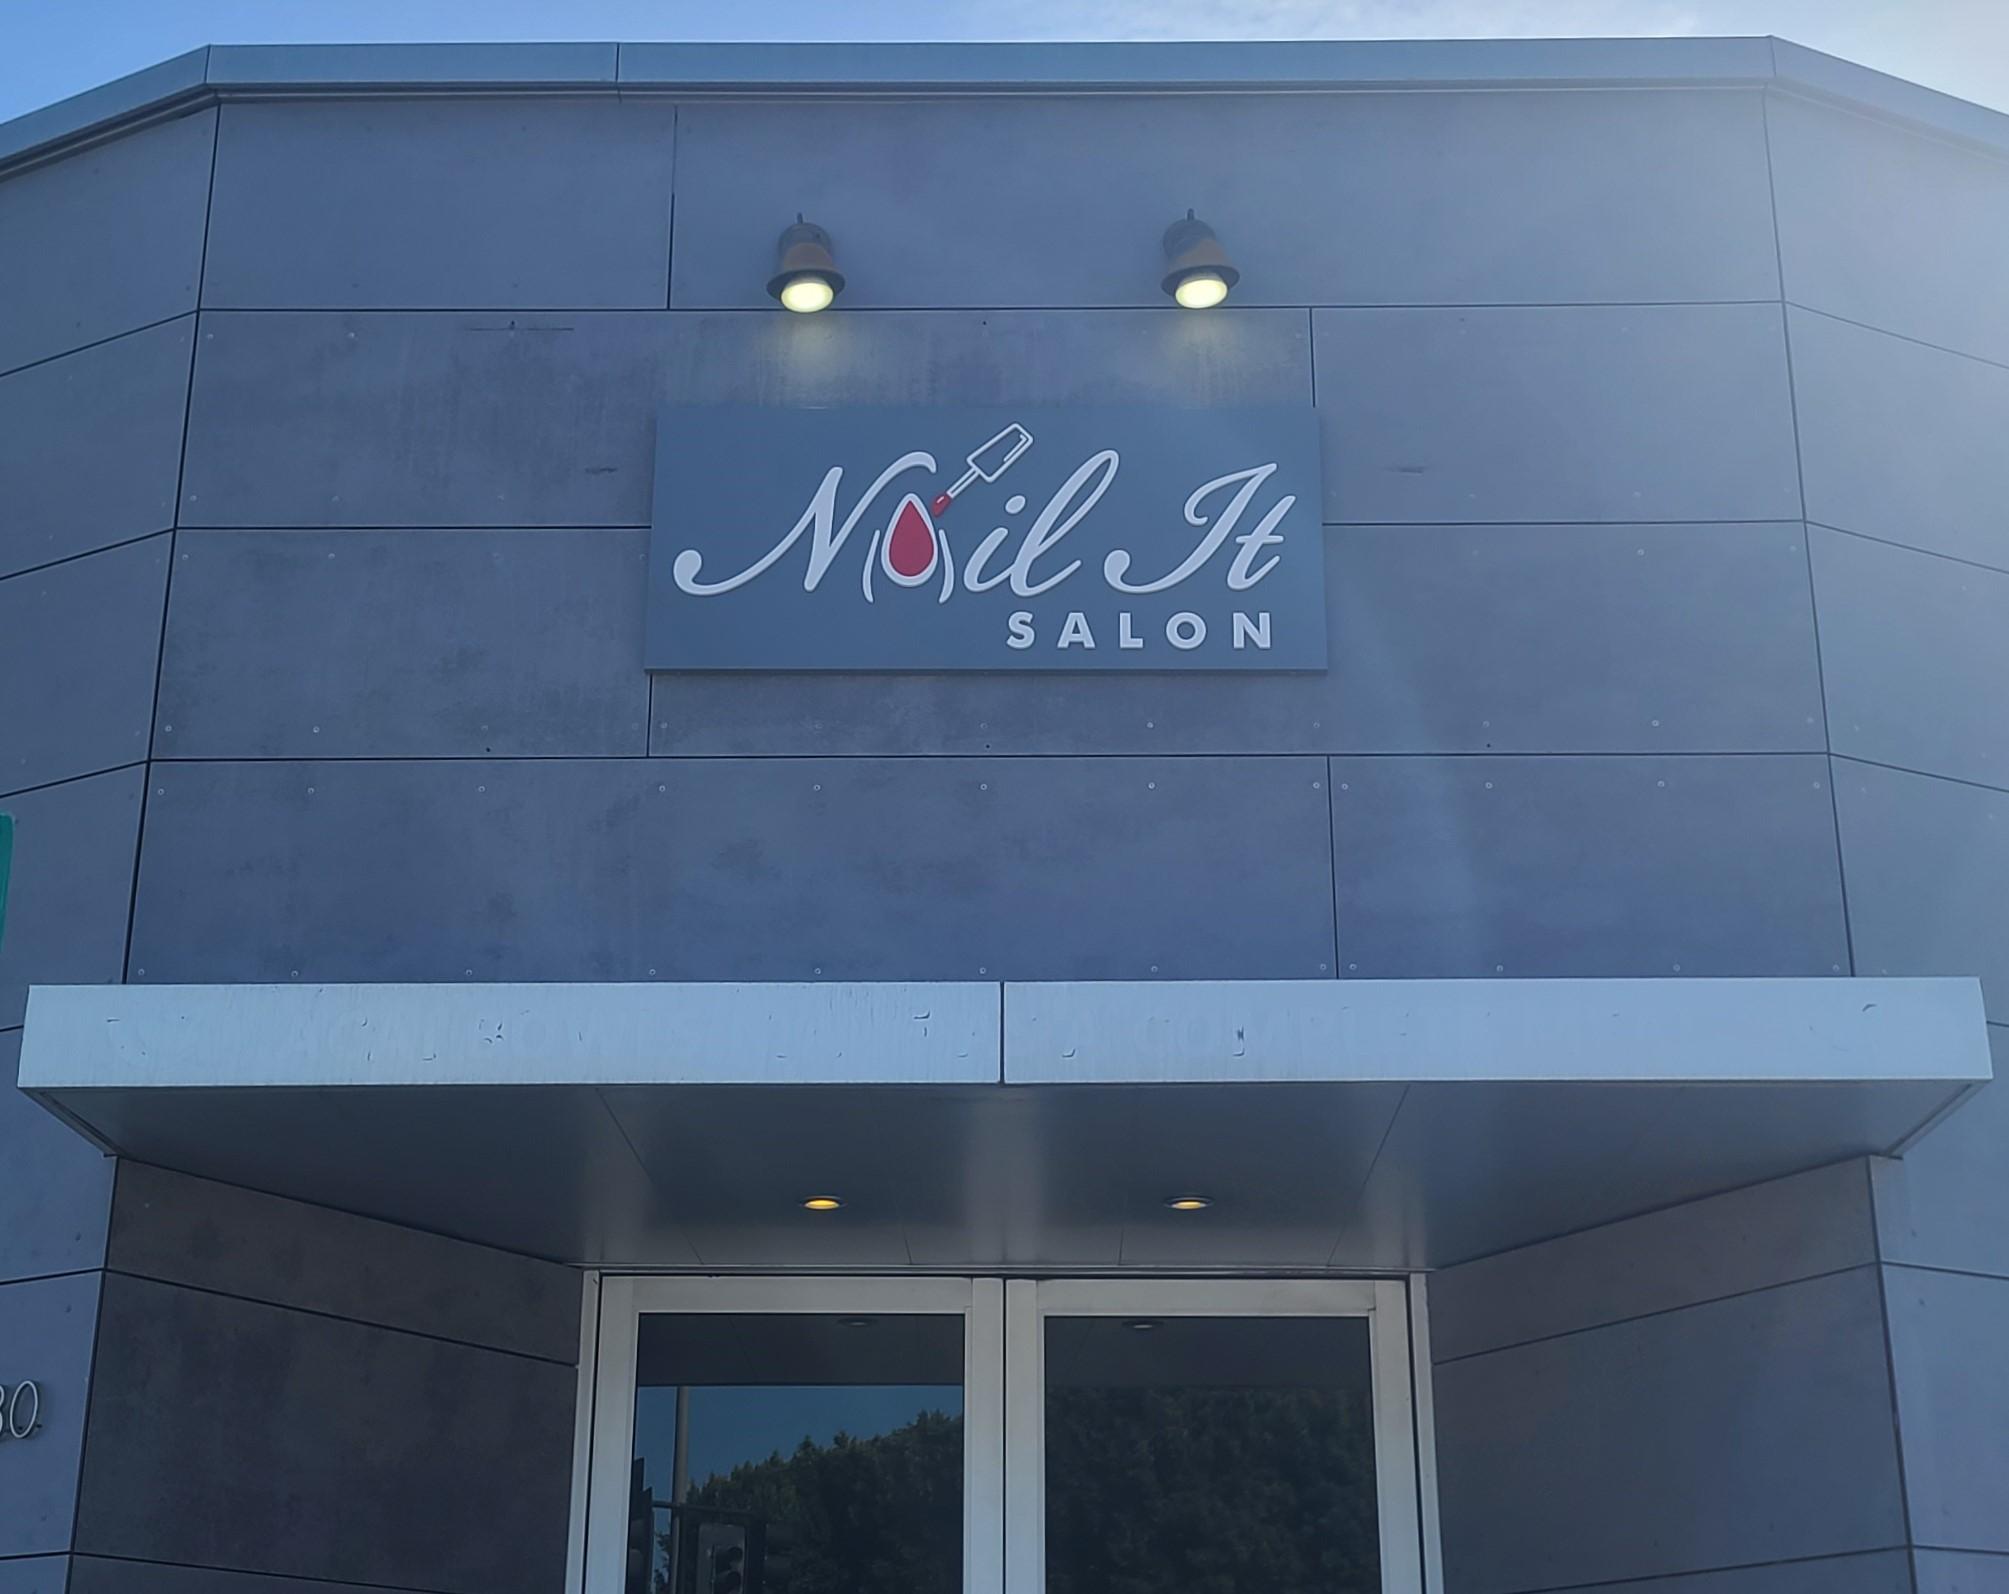 The acrylic letters building sign we fabricated and installed for Nail It Salon in Culver City stand out and make their location more attractive to the eye.